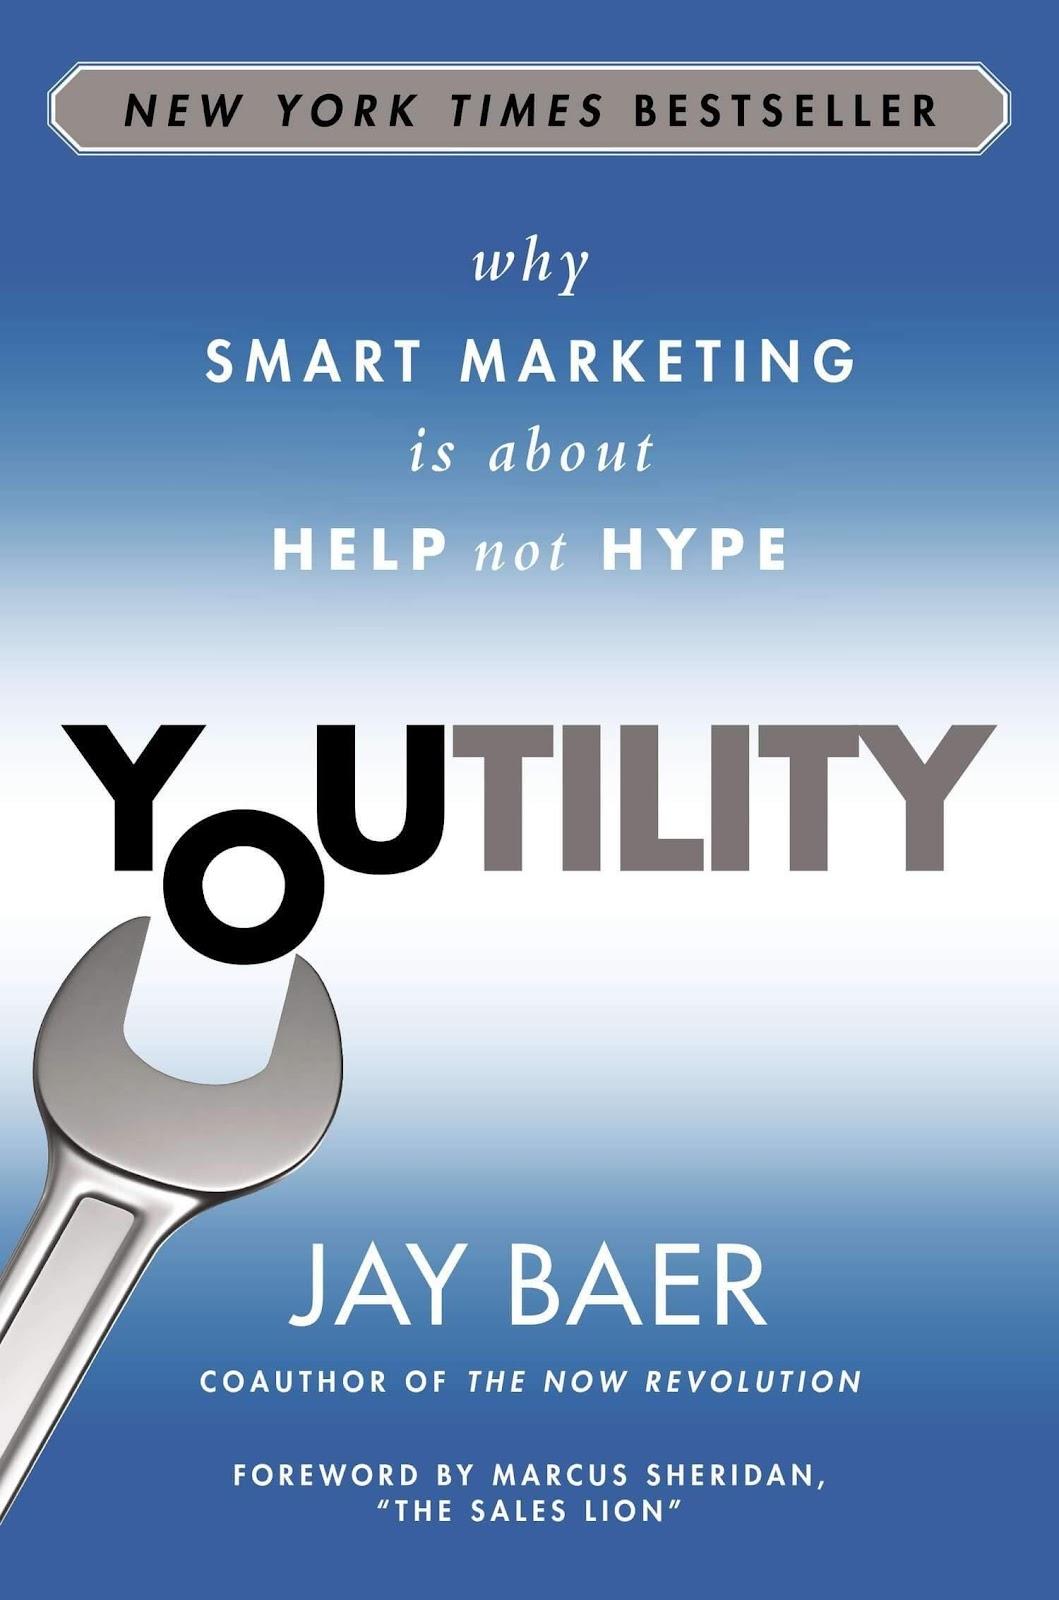 book cover of Jay Baer's "Youtility"